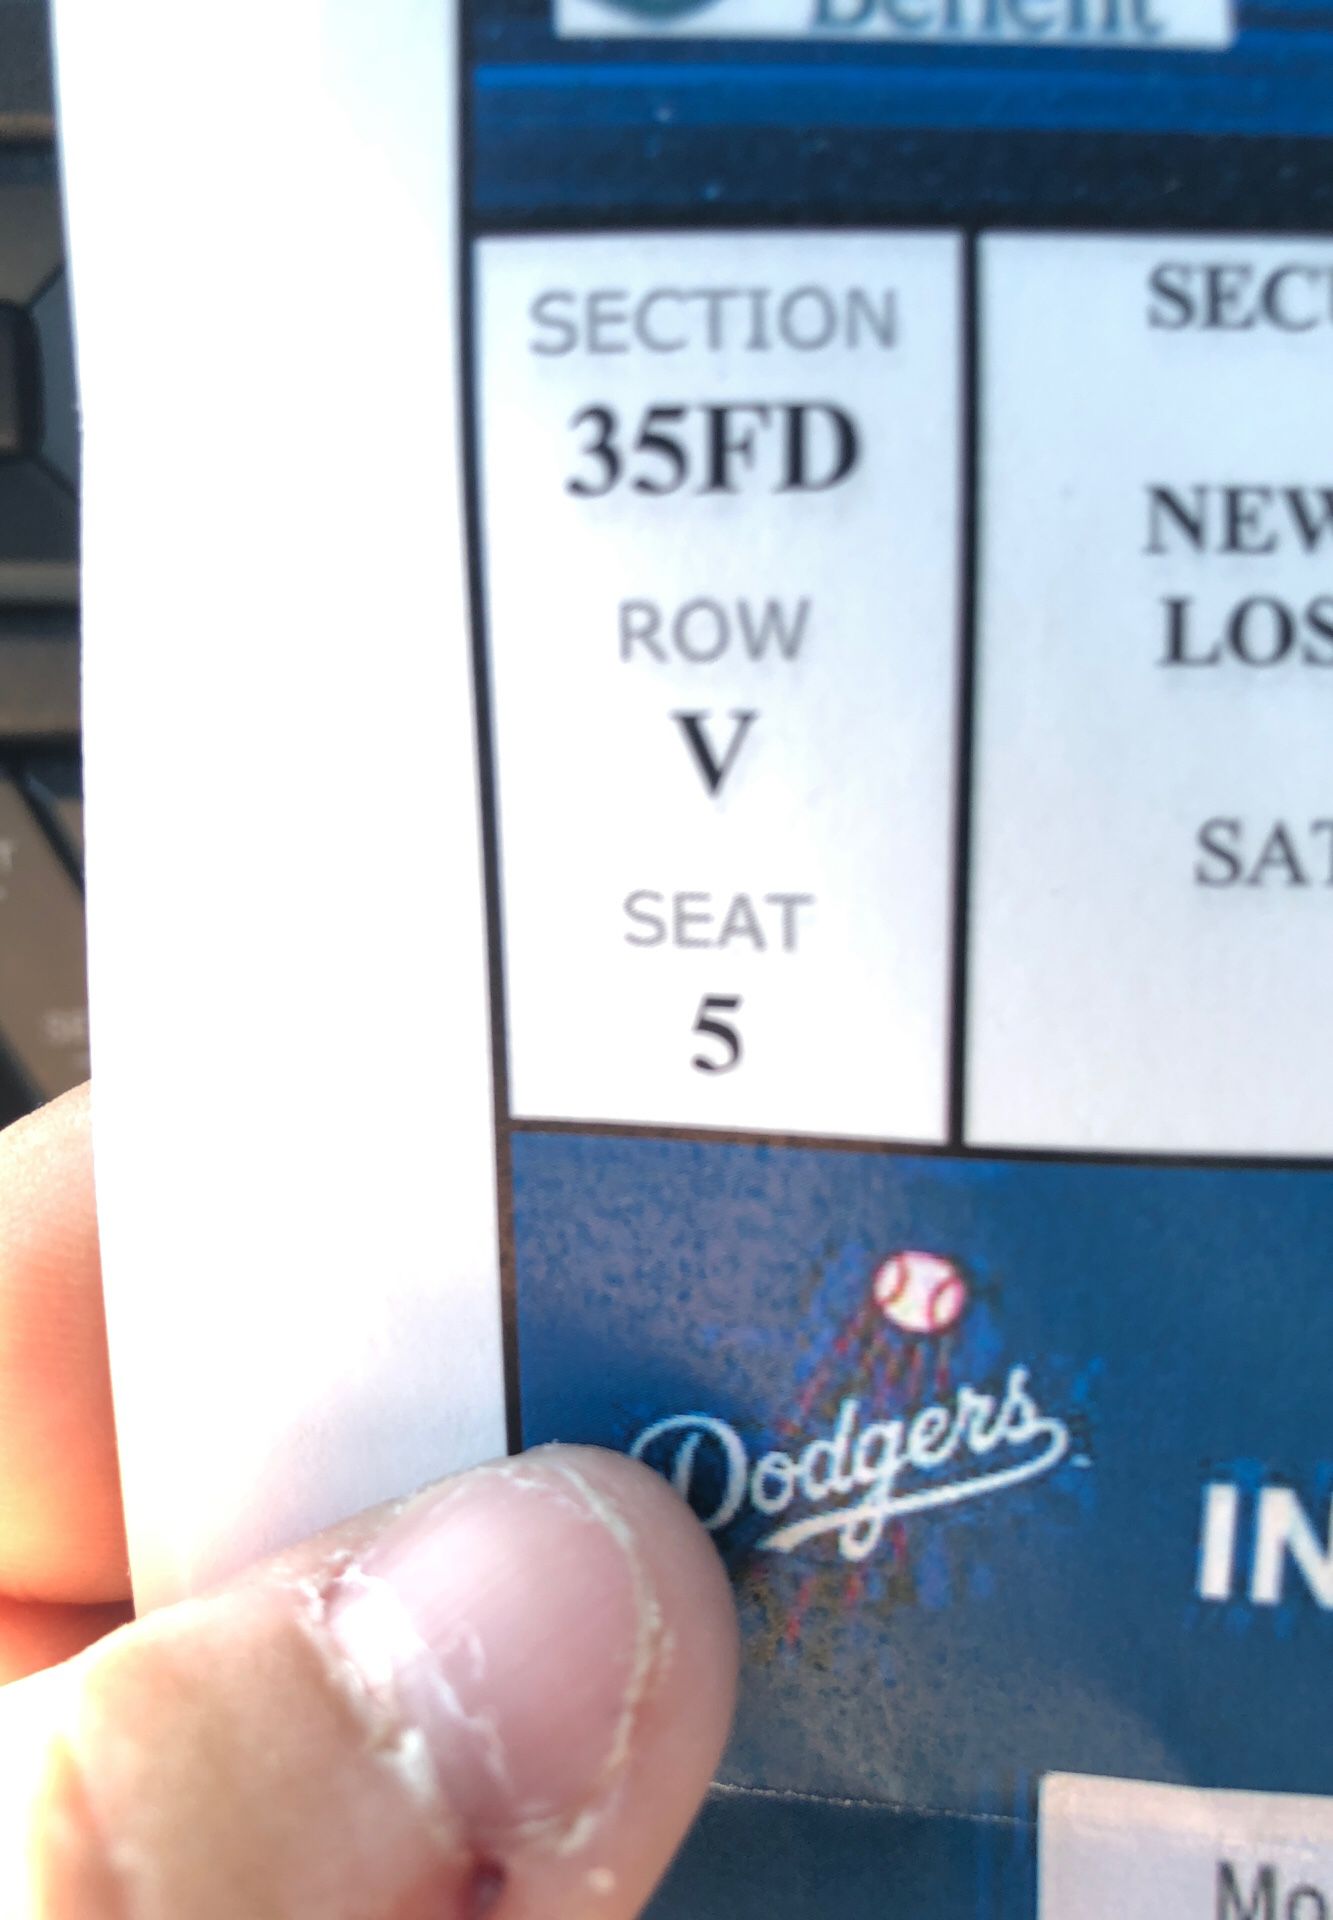 4 tickets to Yankees against dodgers Saturday 8-24-19. $800